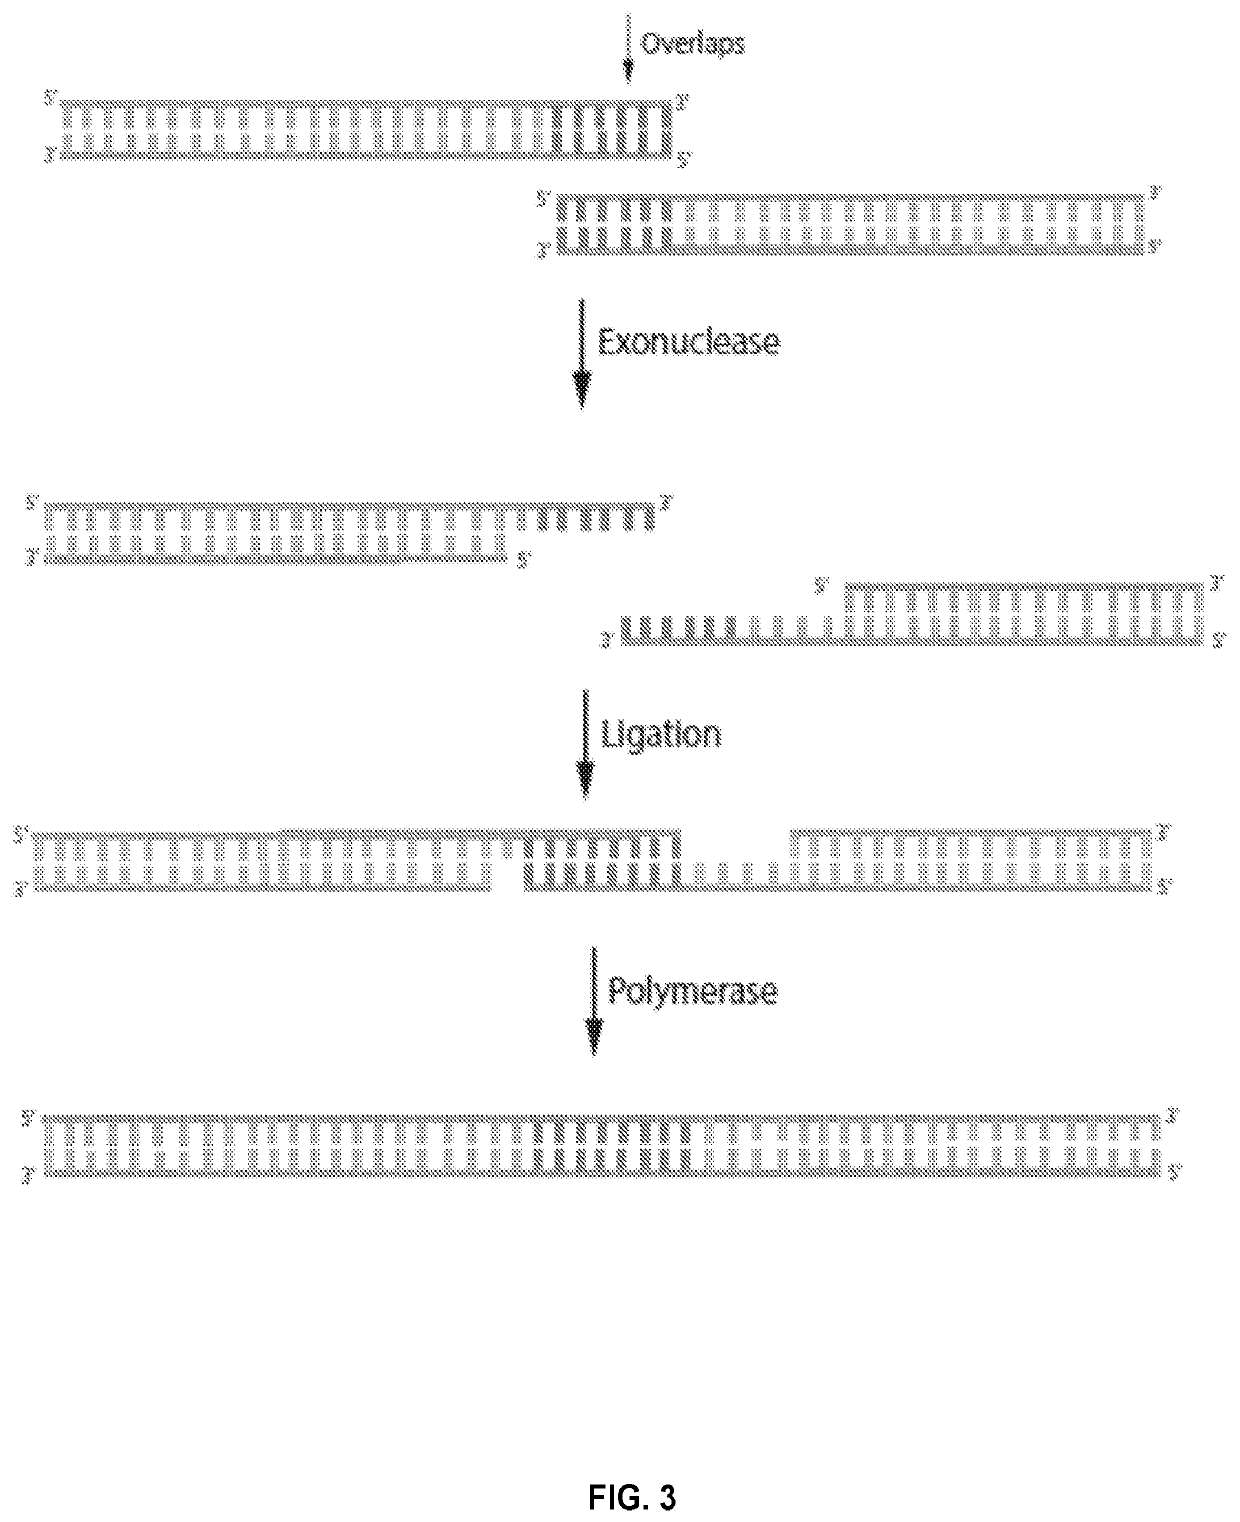 Novel systems, methods and compositions for the direct synthesis of sticky ended polynucleotides